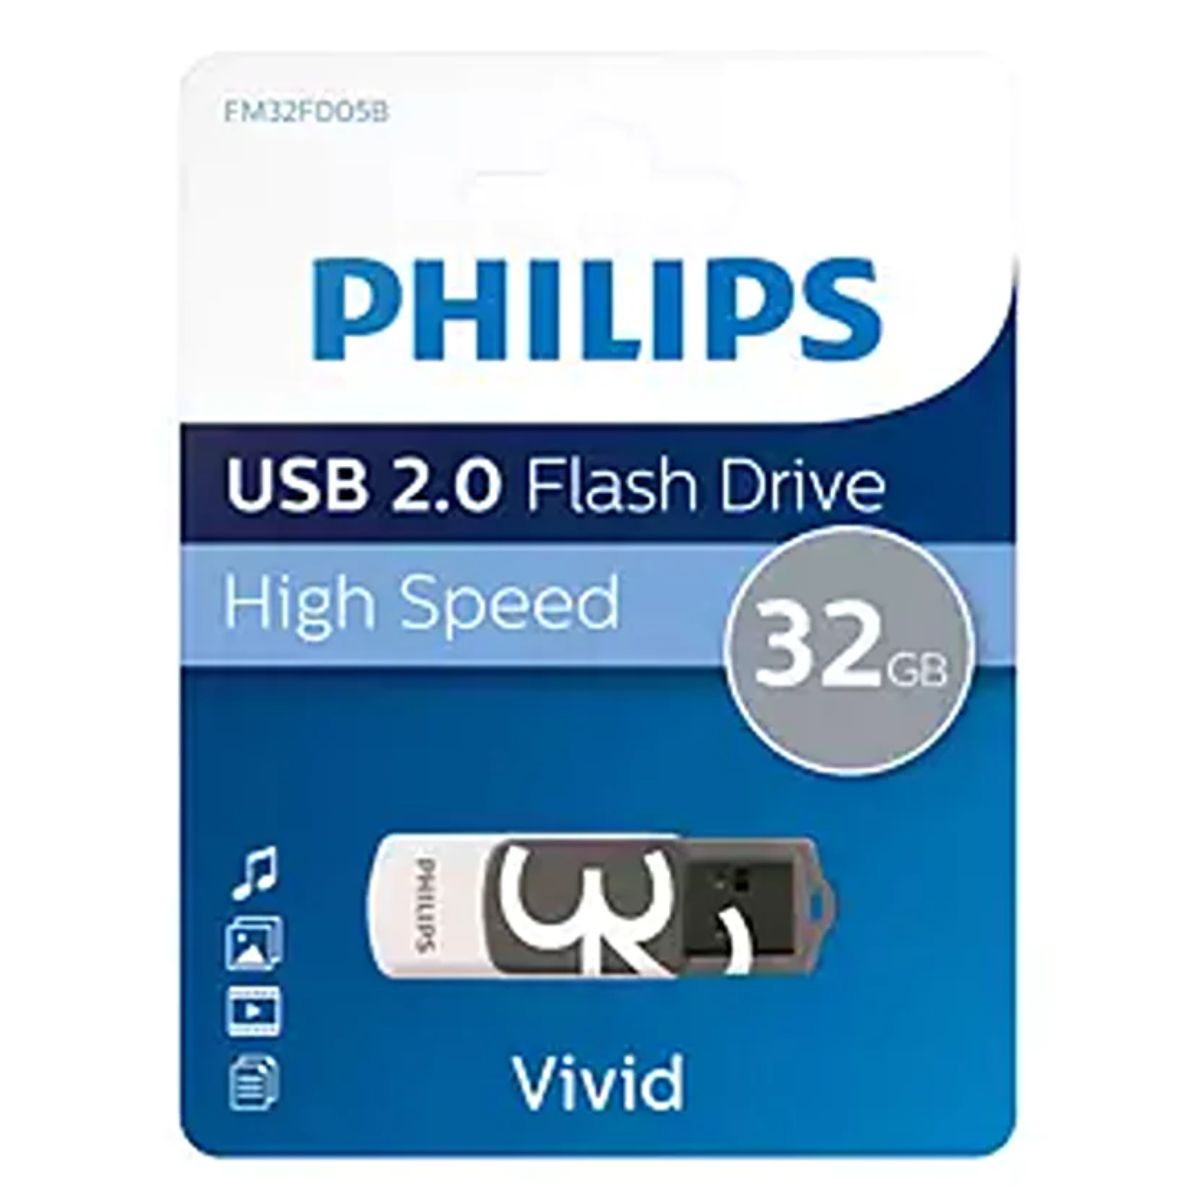 Philips - USB 2.0 Vivid 32gb High Speed Flash Drive in packaging.